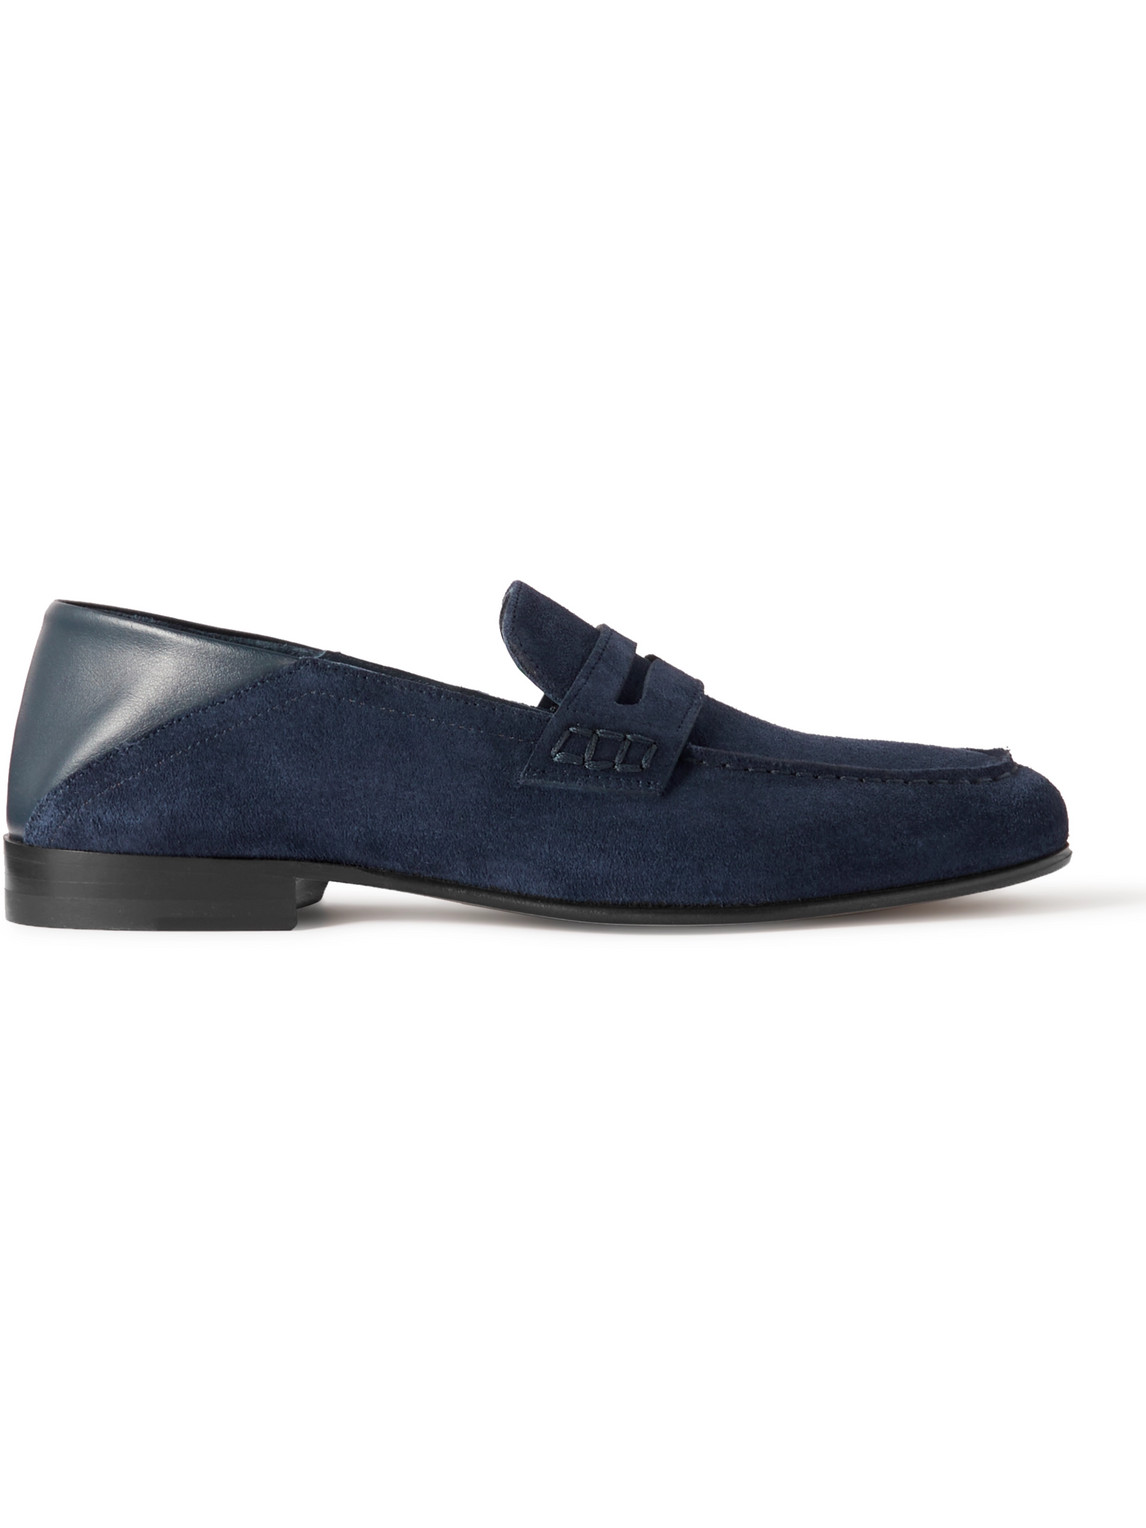 Plymouth Collapsible-Heel Suede and Leather Penny Loafers